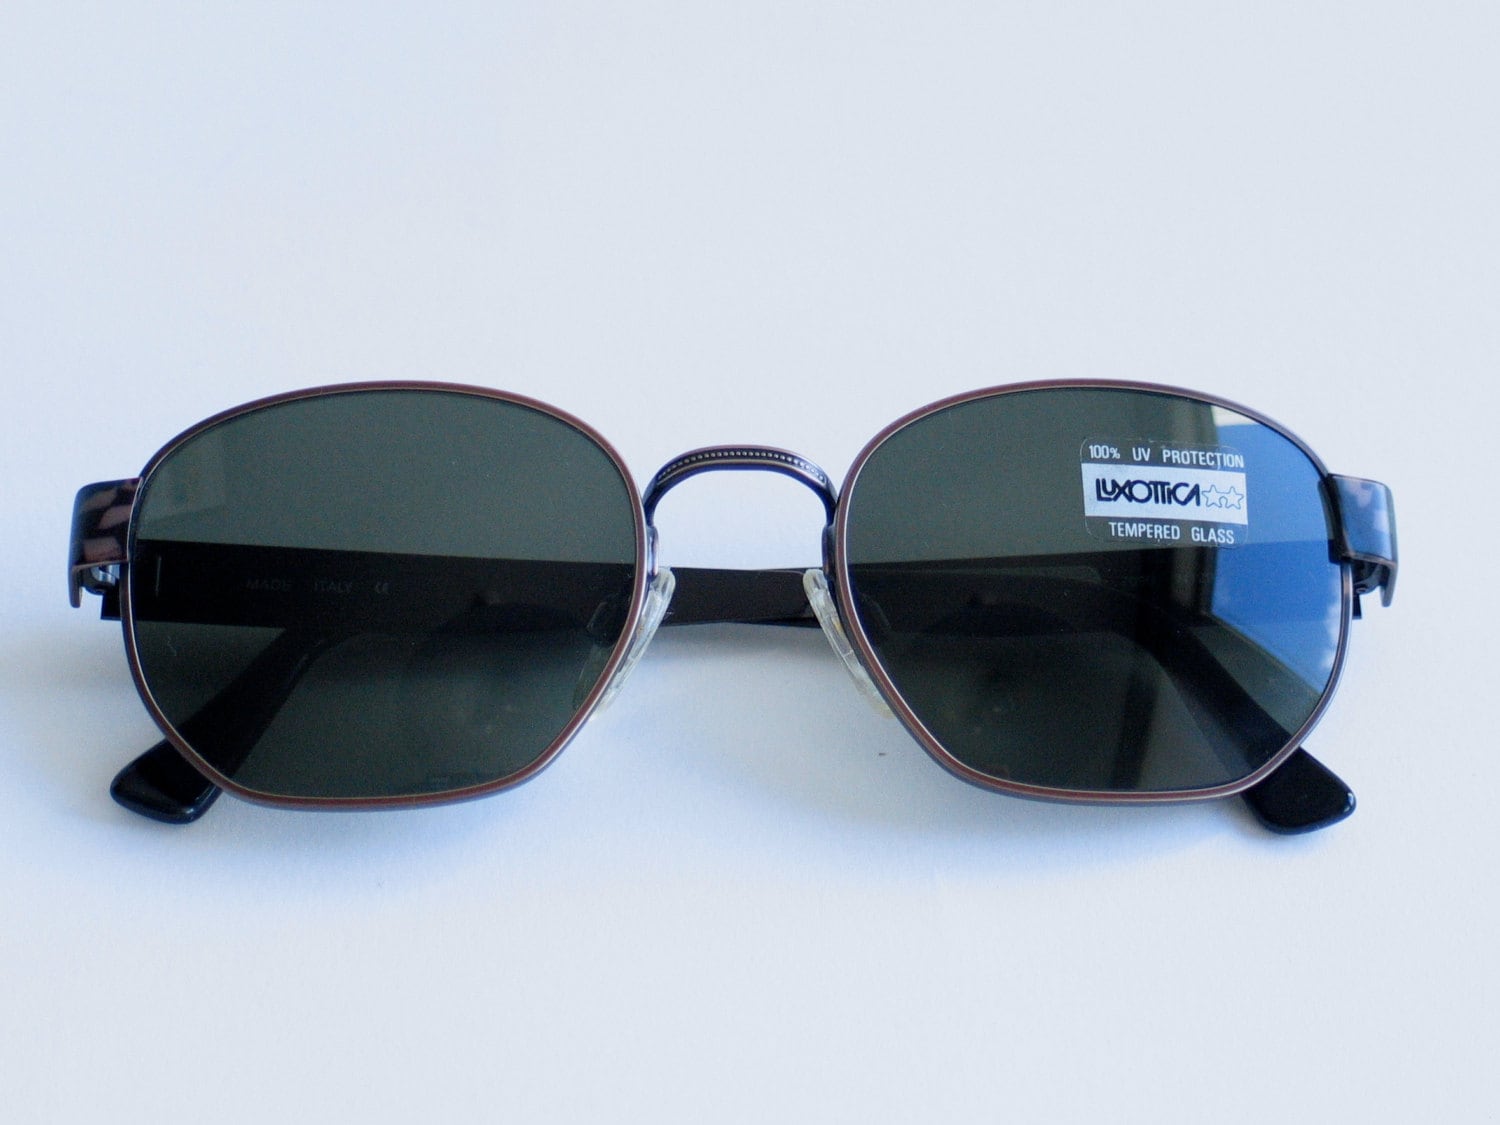 Luxottica fantastic unisex vintage sunglasses made in Italy in the 80’s ...